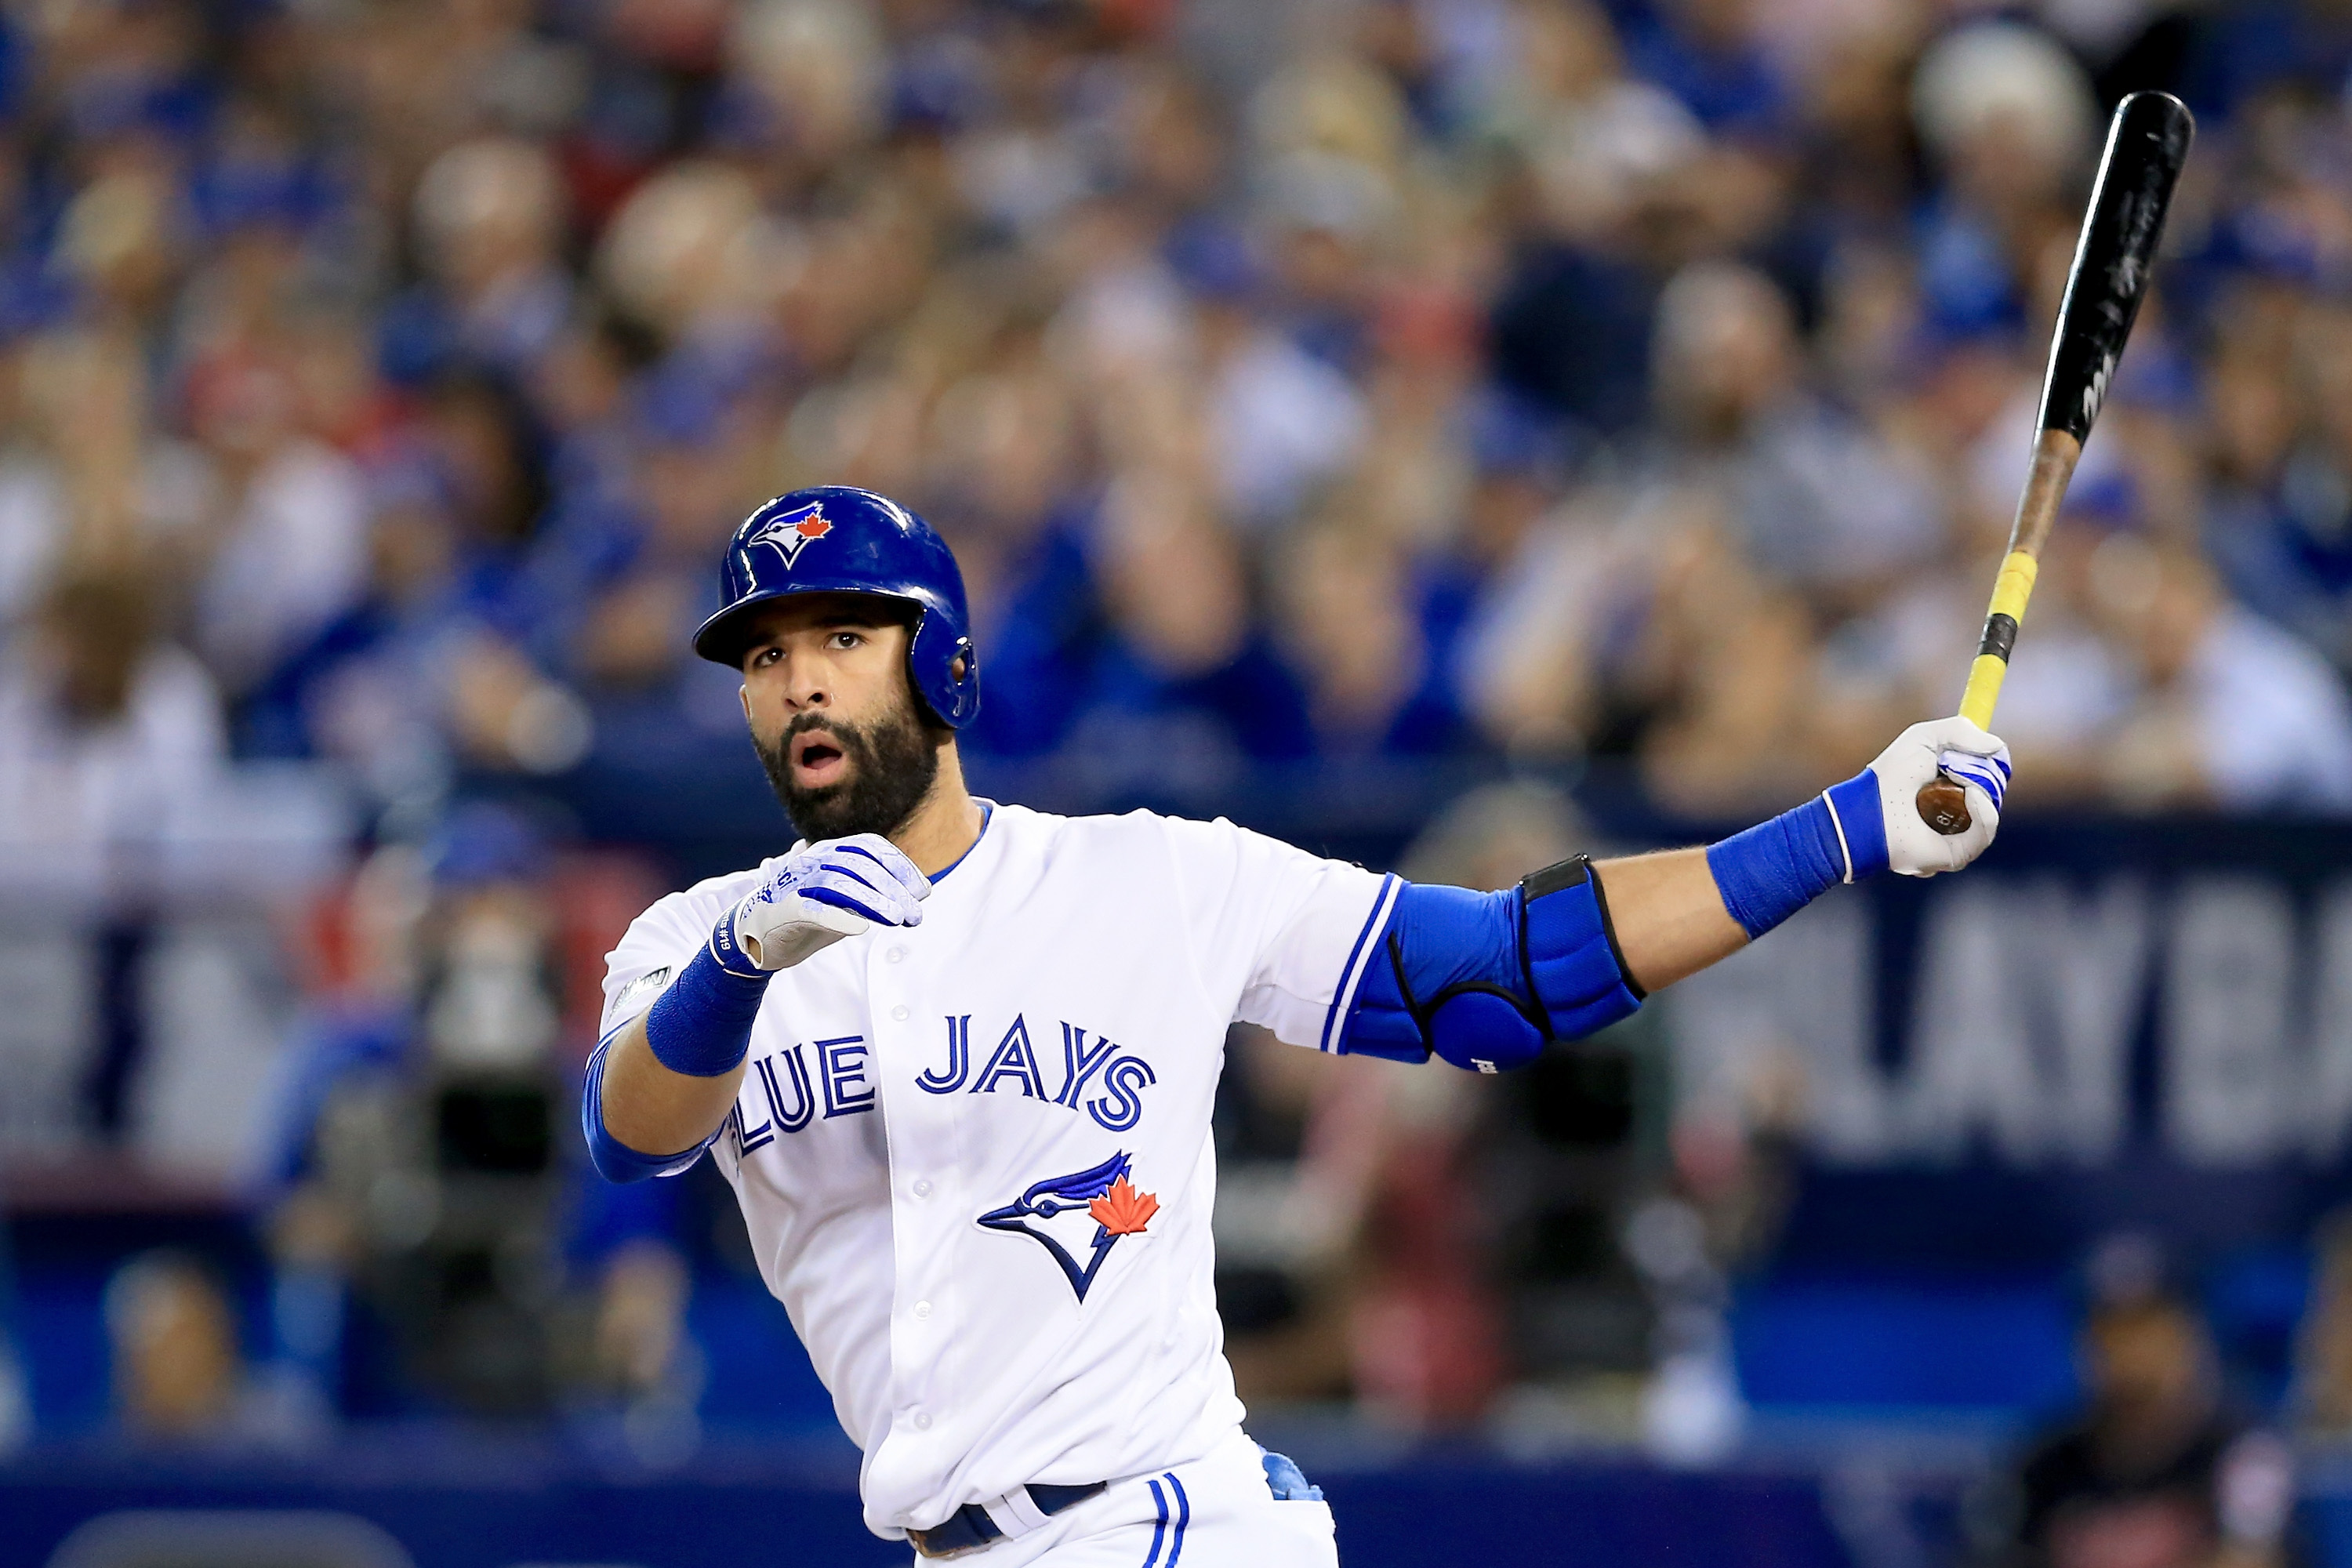 Jose Bautista Reportedly Agrees to Re-Sign with Blue Jays